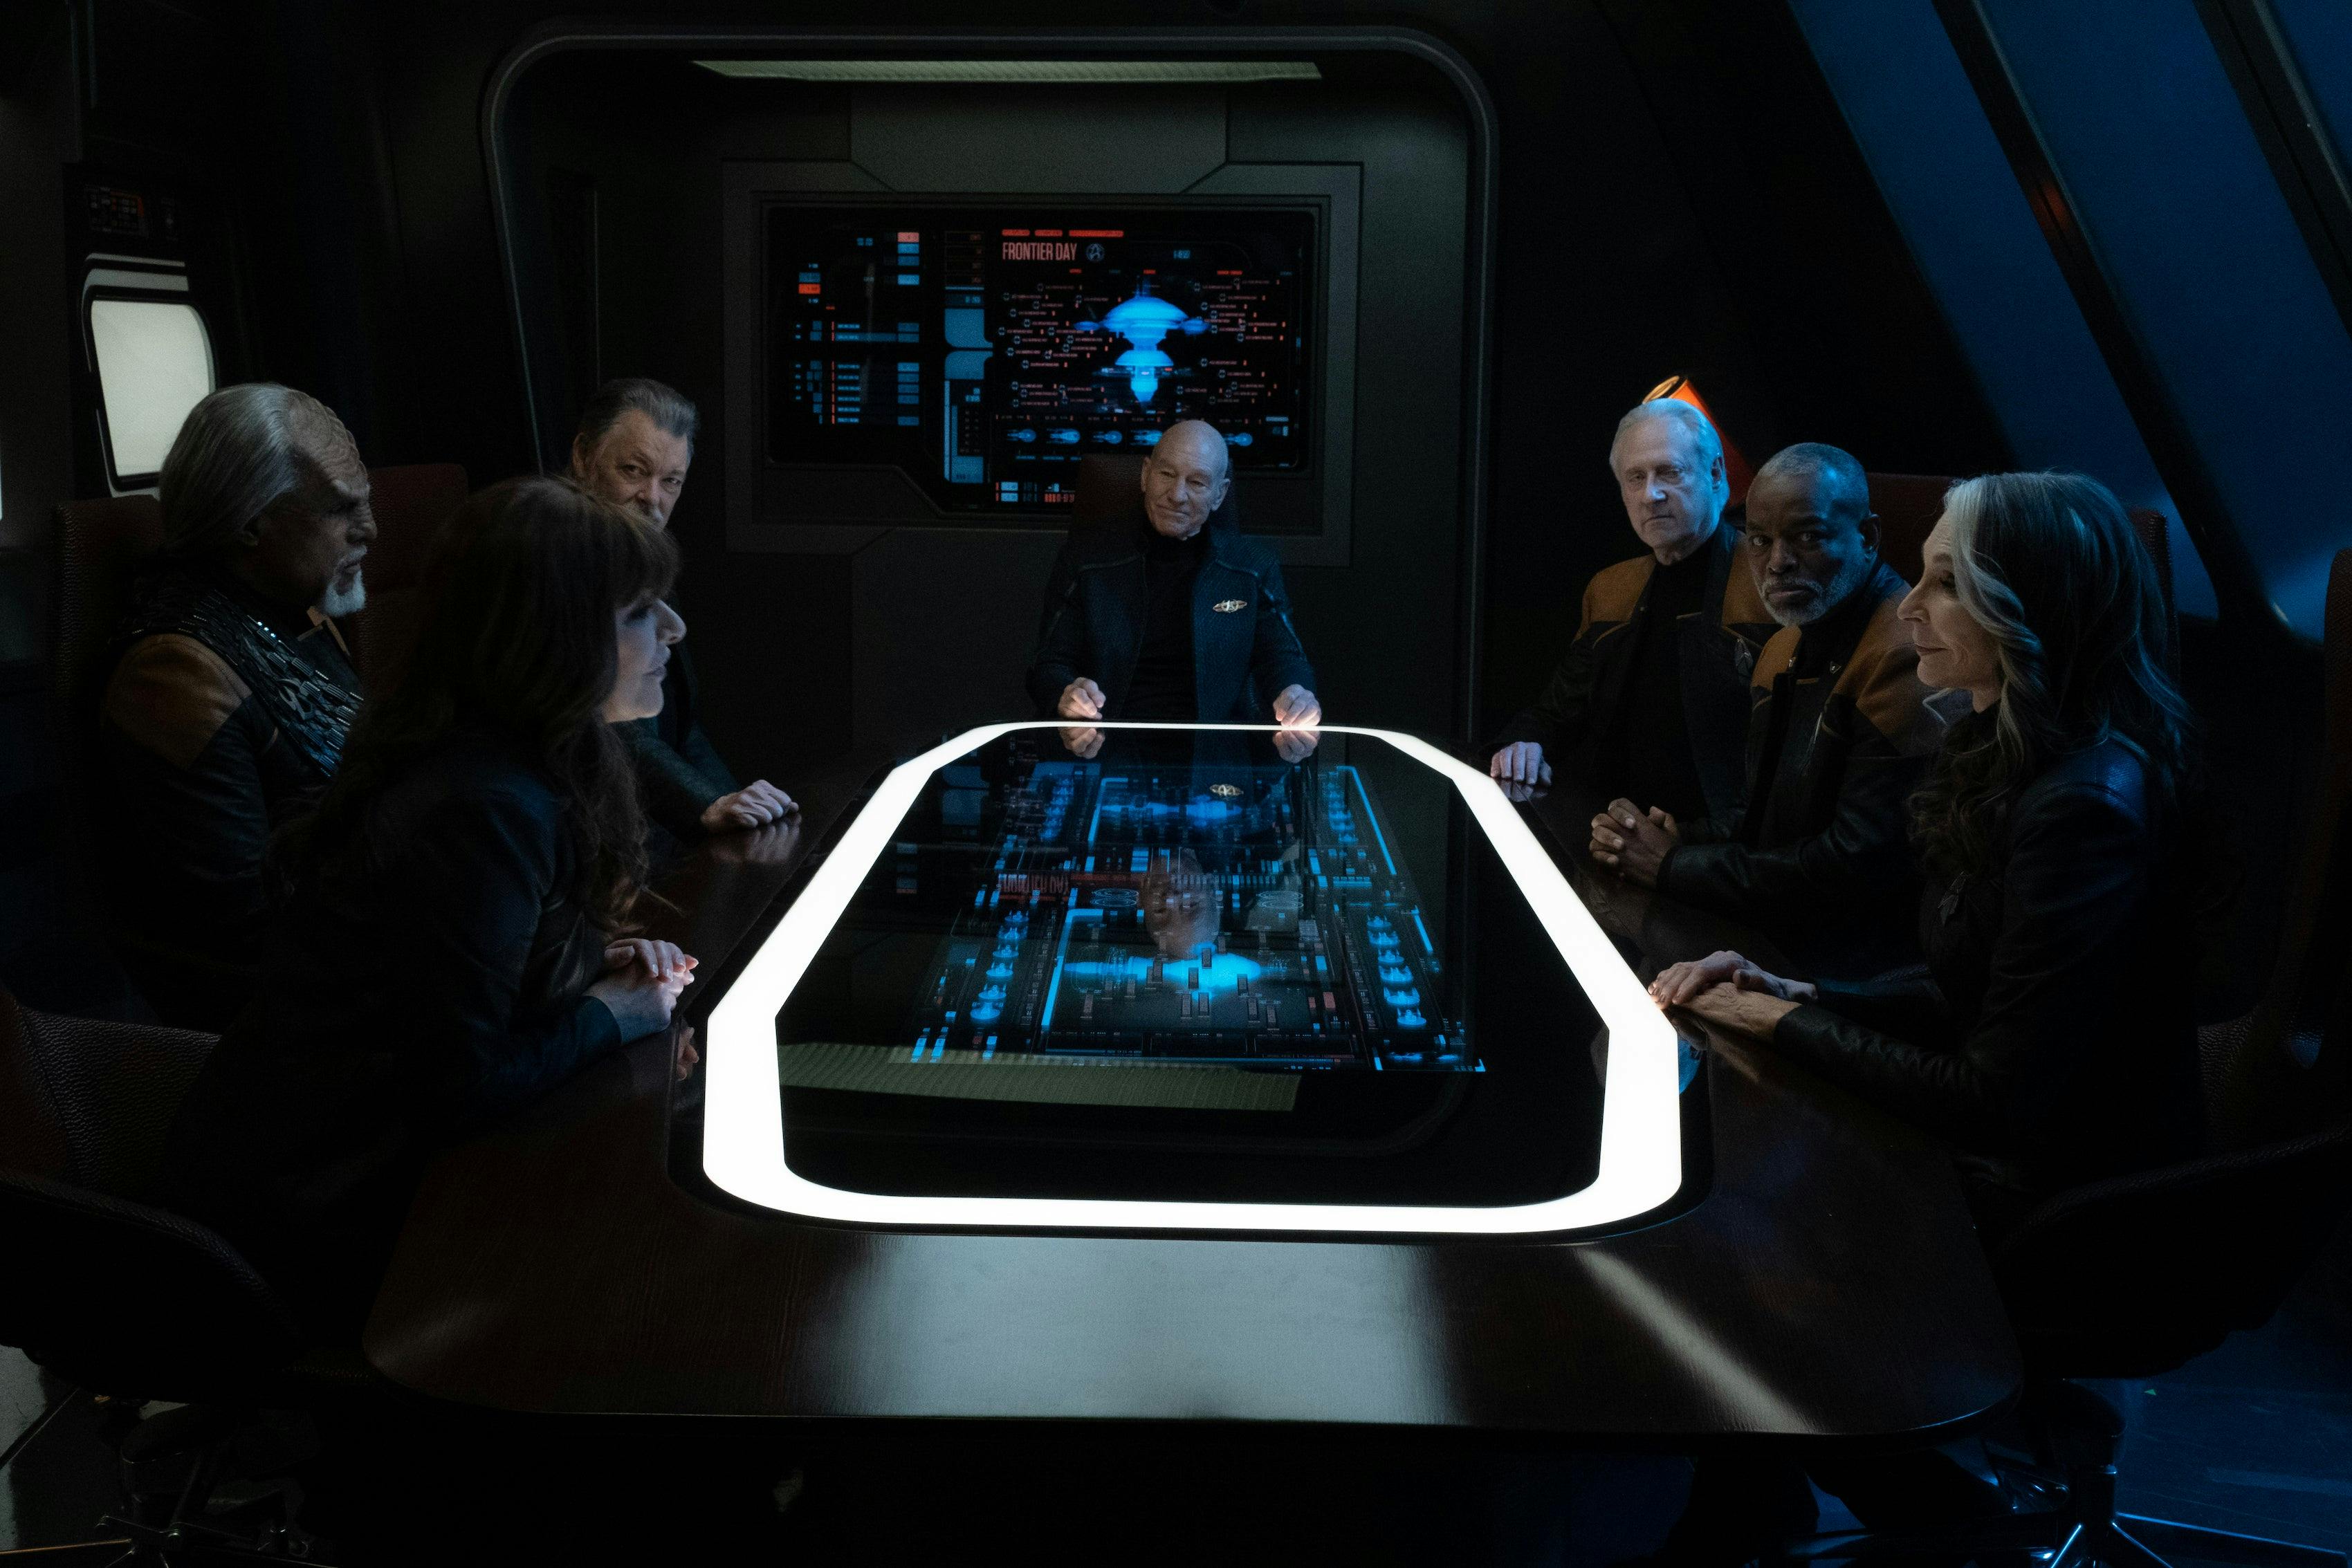 The Enterprise crew (Deanna Troi, Worf, Will Riker, Jean-Luc Picard, Data, Geordi La Forge, and Beverly Crusher) sit all together around the table in the Titan's Observation Lounge